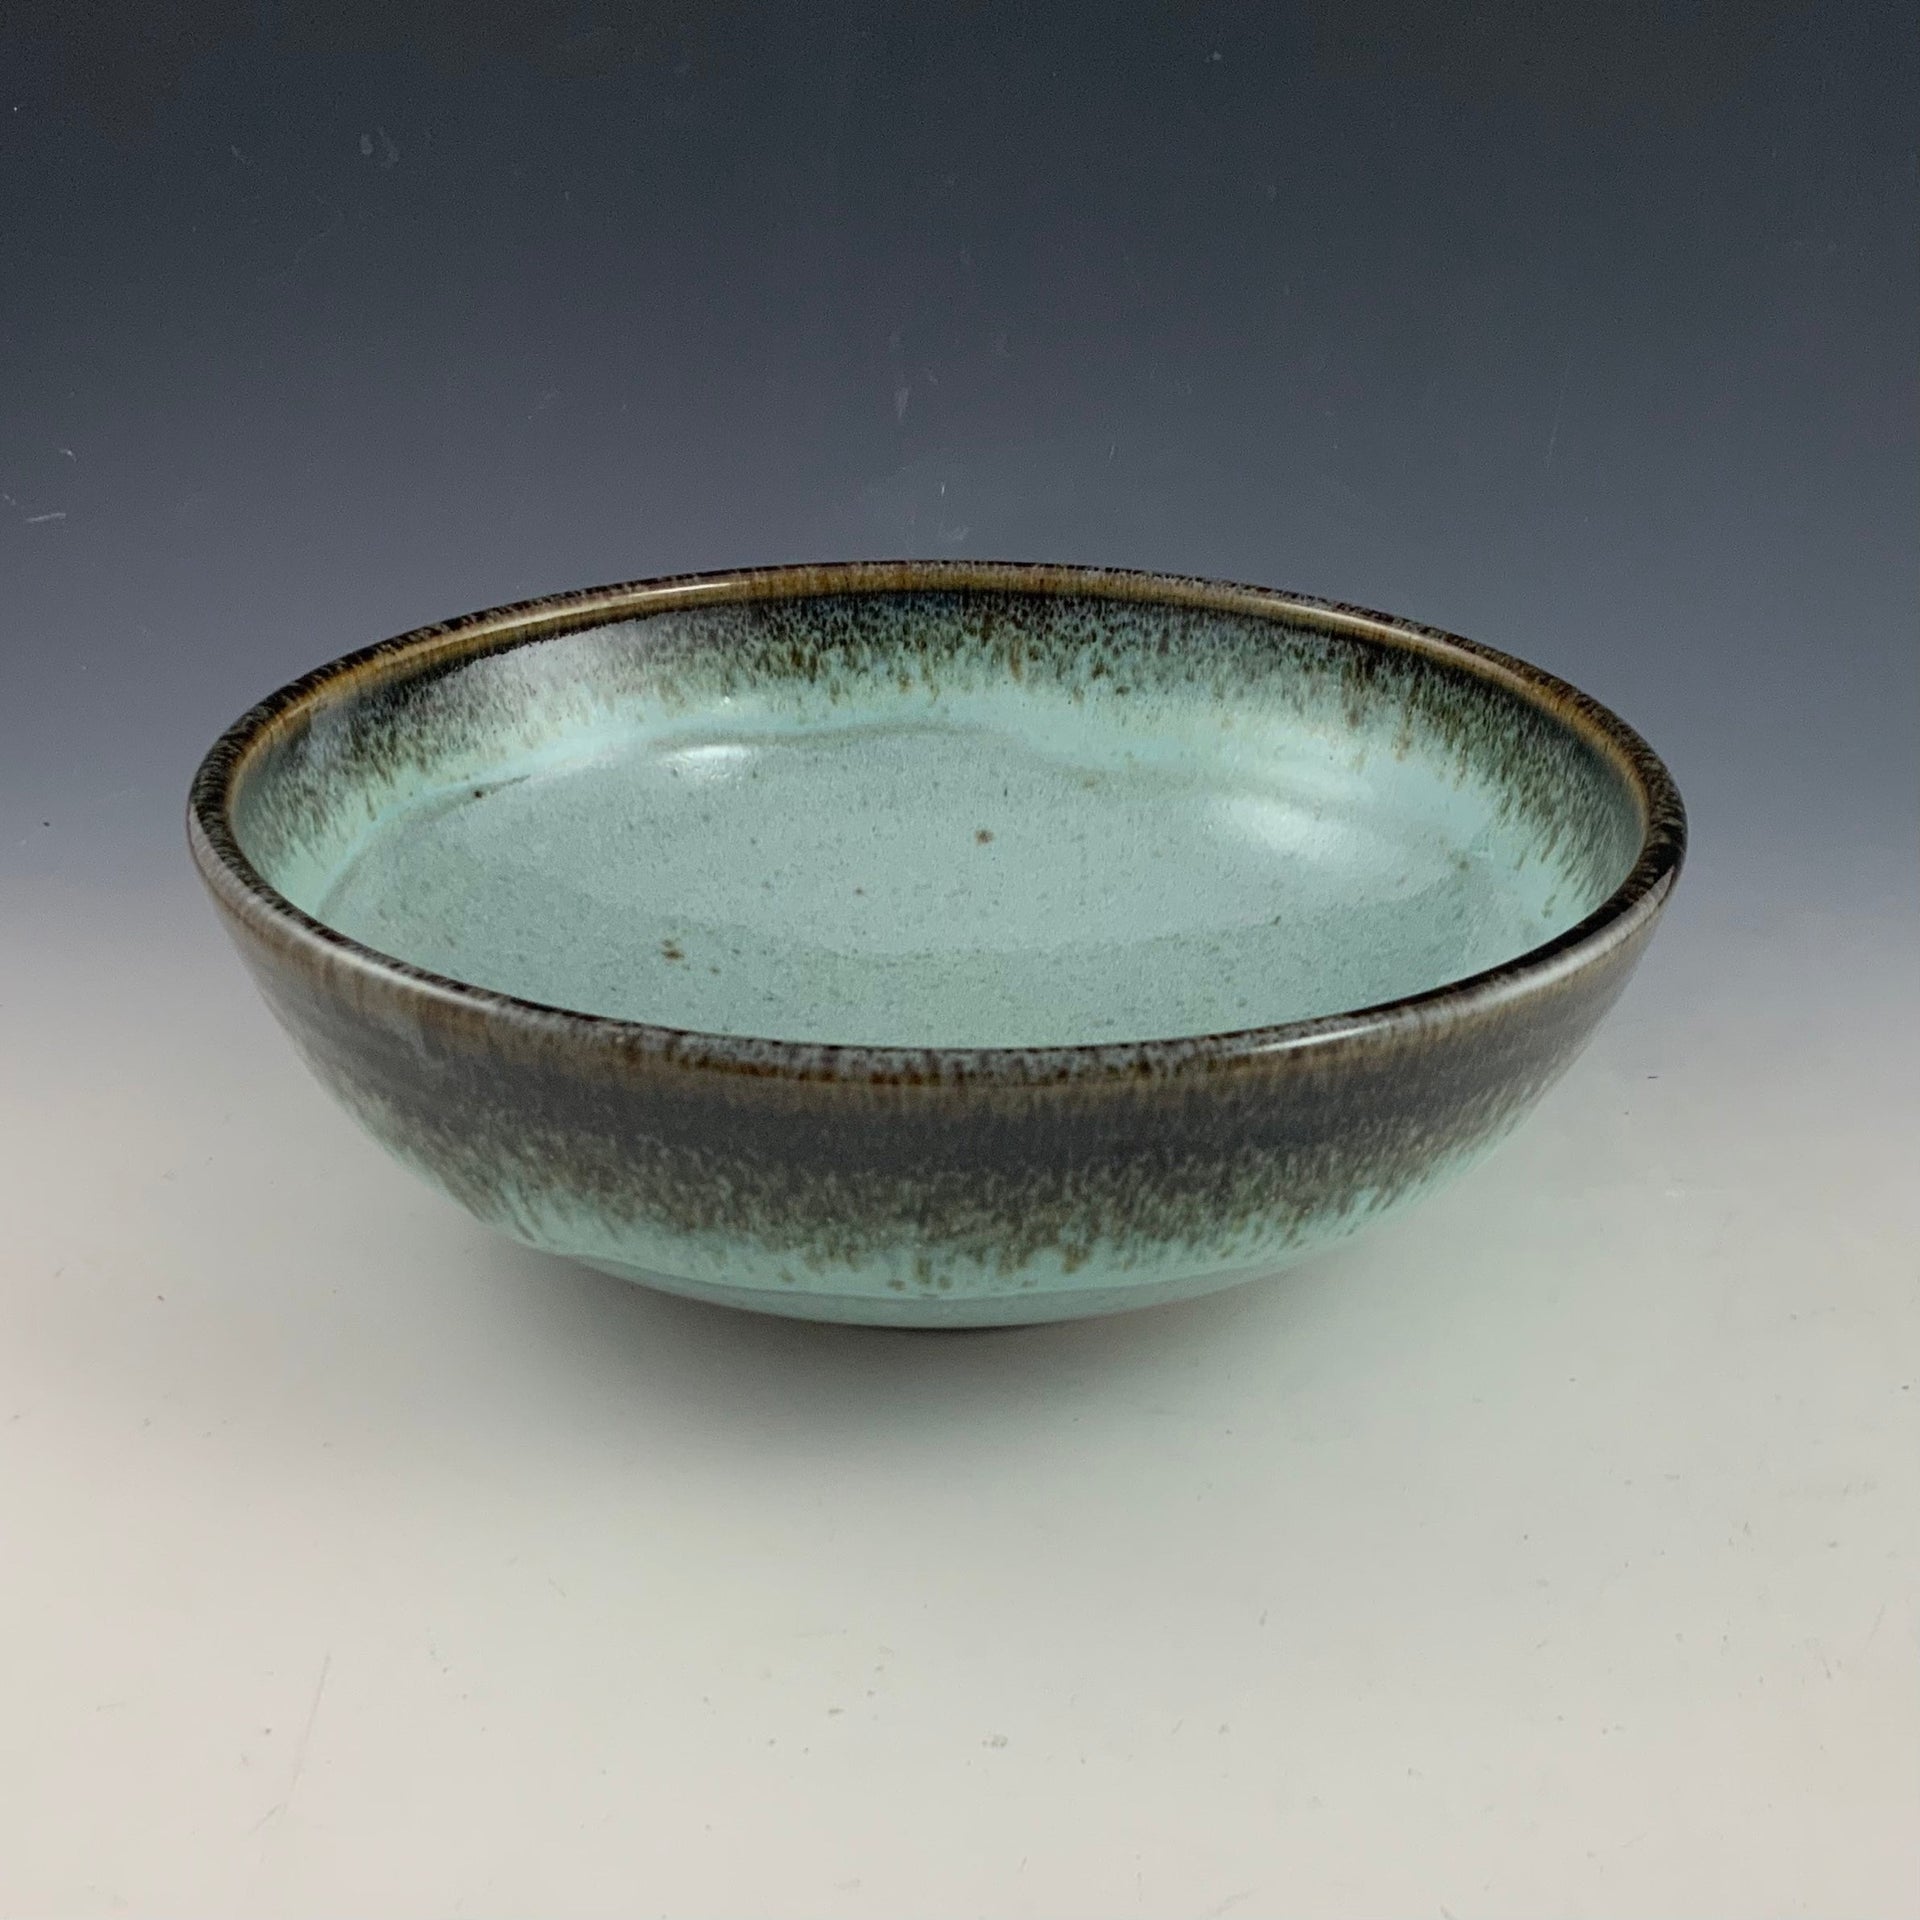 Deep Ceramic Mixing Bowl With Handle and Spout, Modern Light Blue Stoneware  Pasta Bowl 